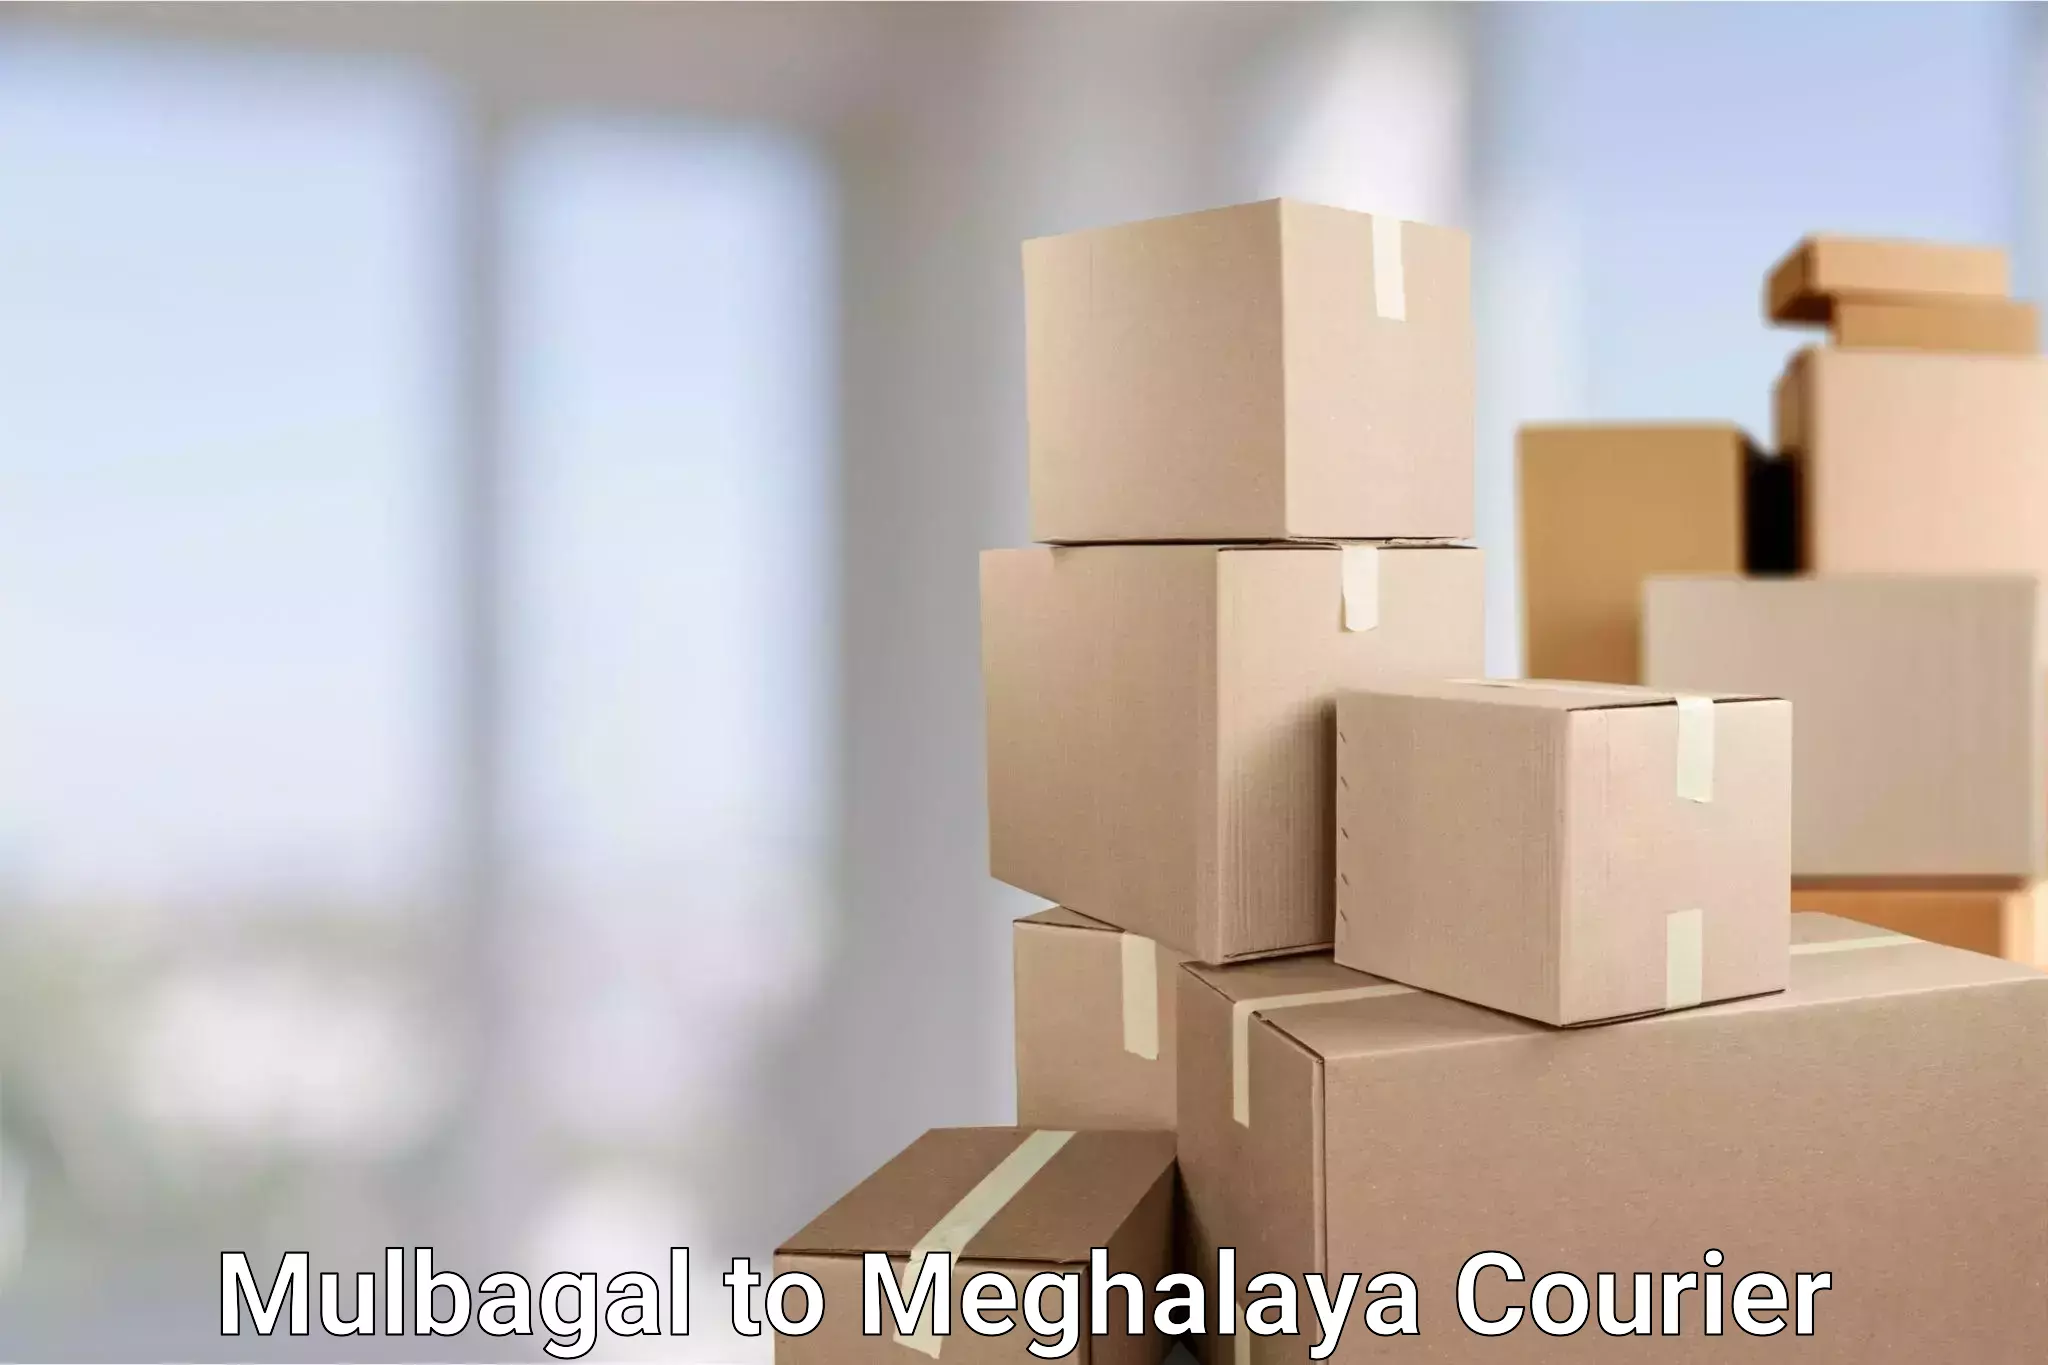 Efficient parcel service Mulbagal to Meghalaya